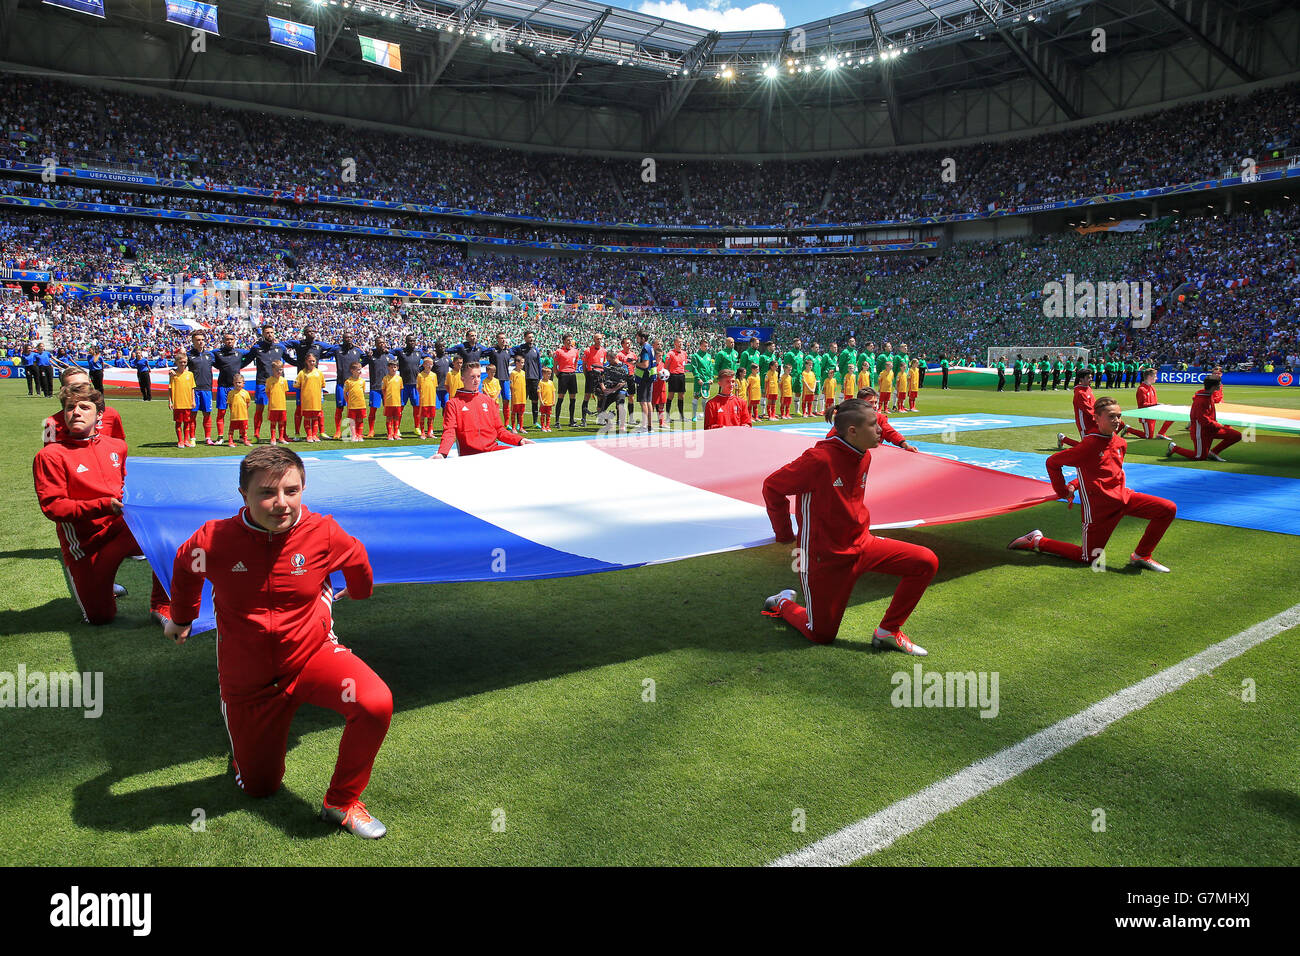 Mascots display the French flag before the round of 16 match at the Stade de Lyon, Lyon. PRESS ASSOCIATION Photo. Picture date: Sunday June 26, 2016. See PA story SOCCER France. Photo credit should read: Nick Potts/PA Wire. Stock Photo